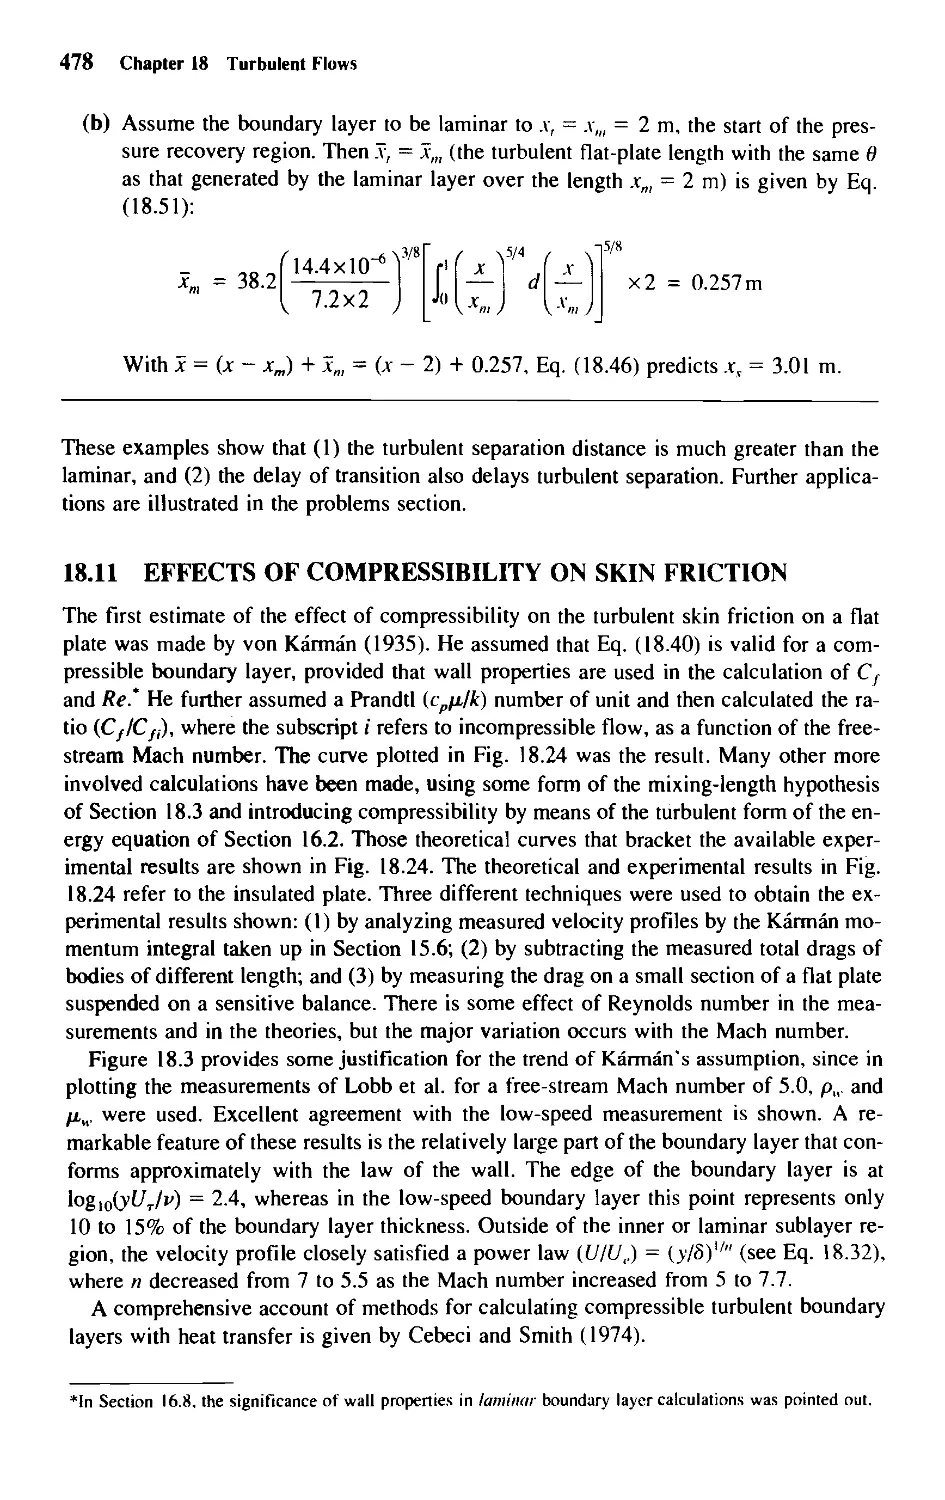 18.11 - Effects of Compressibility on Skin Friction